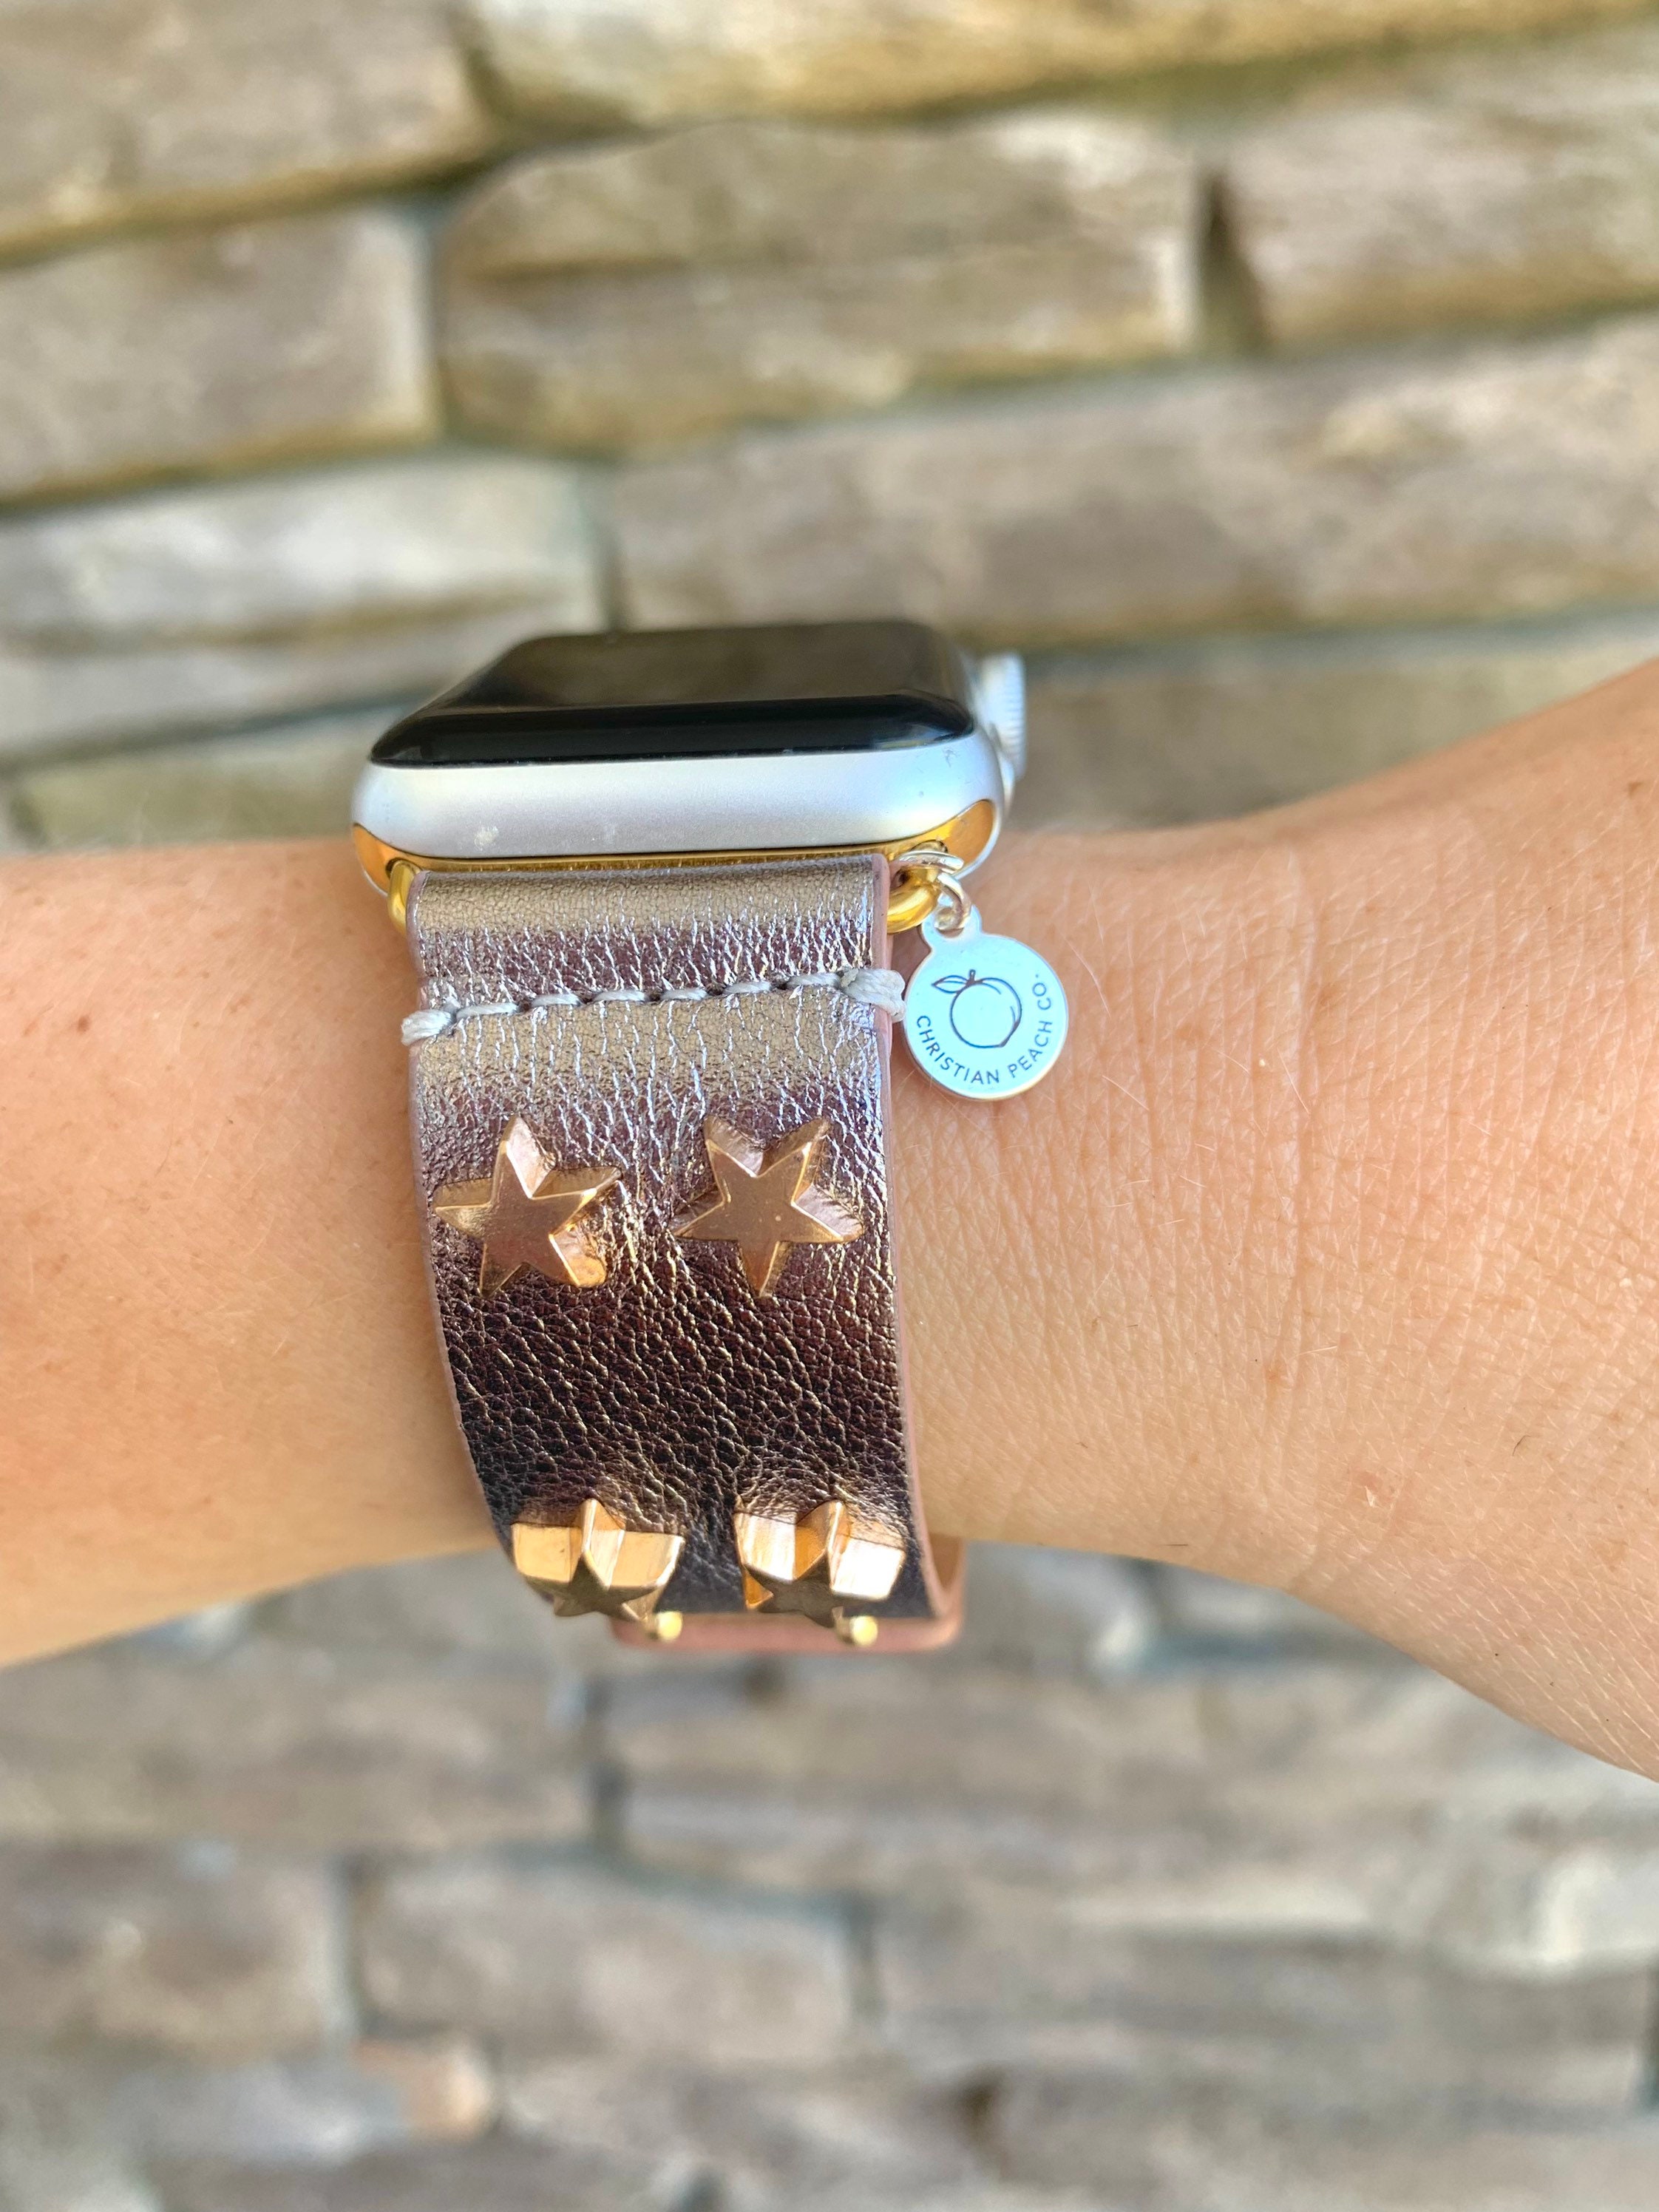 TheChristianPeachCo Gold Star Spangled Apple Watch Band / Faux Stone / Faux Leather Adjustable / 38mm or 40mm / Western Watch Band / Gifts for Her